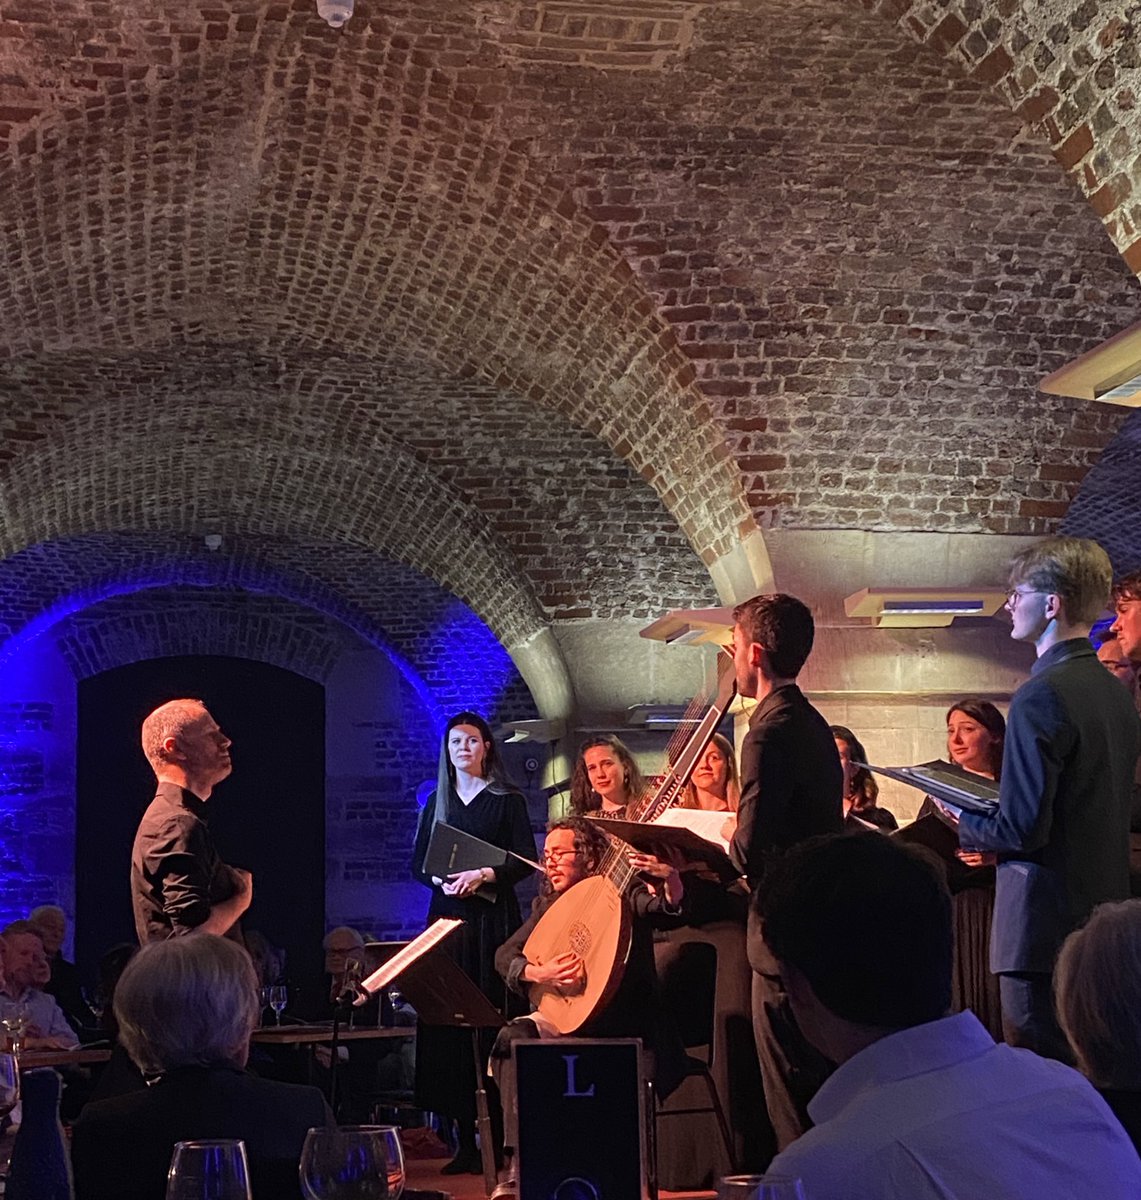 Last night’s sold out recital in the Crypt at @smitf_london brought the 2023/24 Monteverdi Apprentice Programme to an exquisite conclusion. Thanks to everyone who came along to hear these exceptional young musicians, led by our own Artistic Advisor, James Halliday 👏